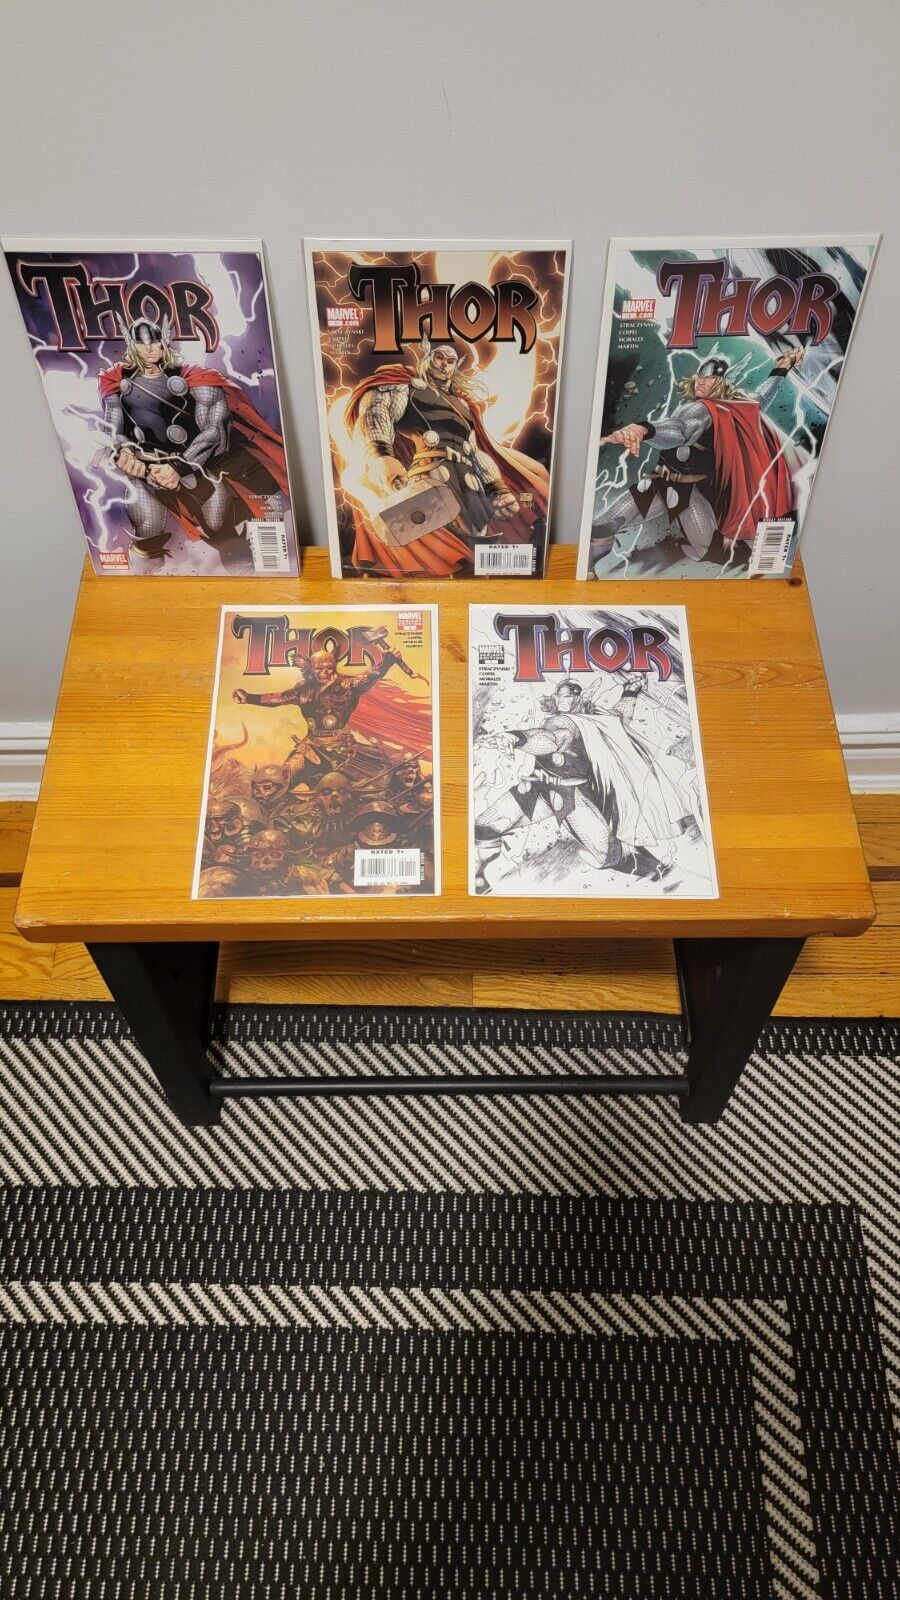 Thor #1 Lot of 5 including Coipel, Turner and Suydam Variants 2007